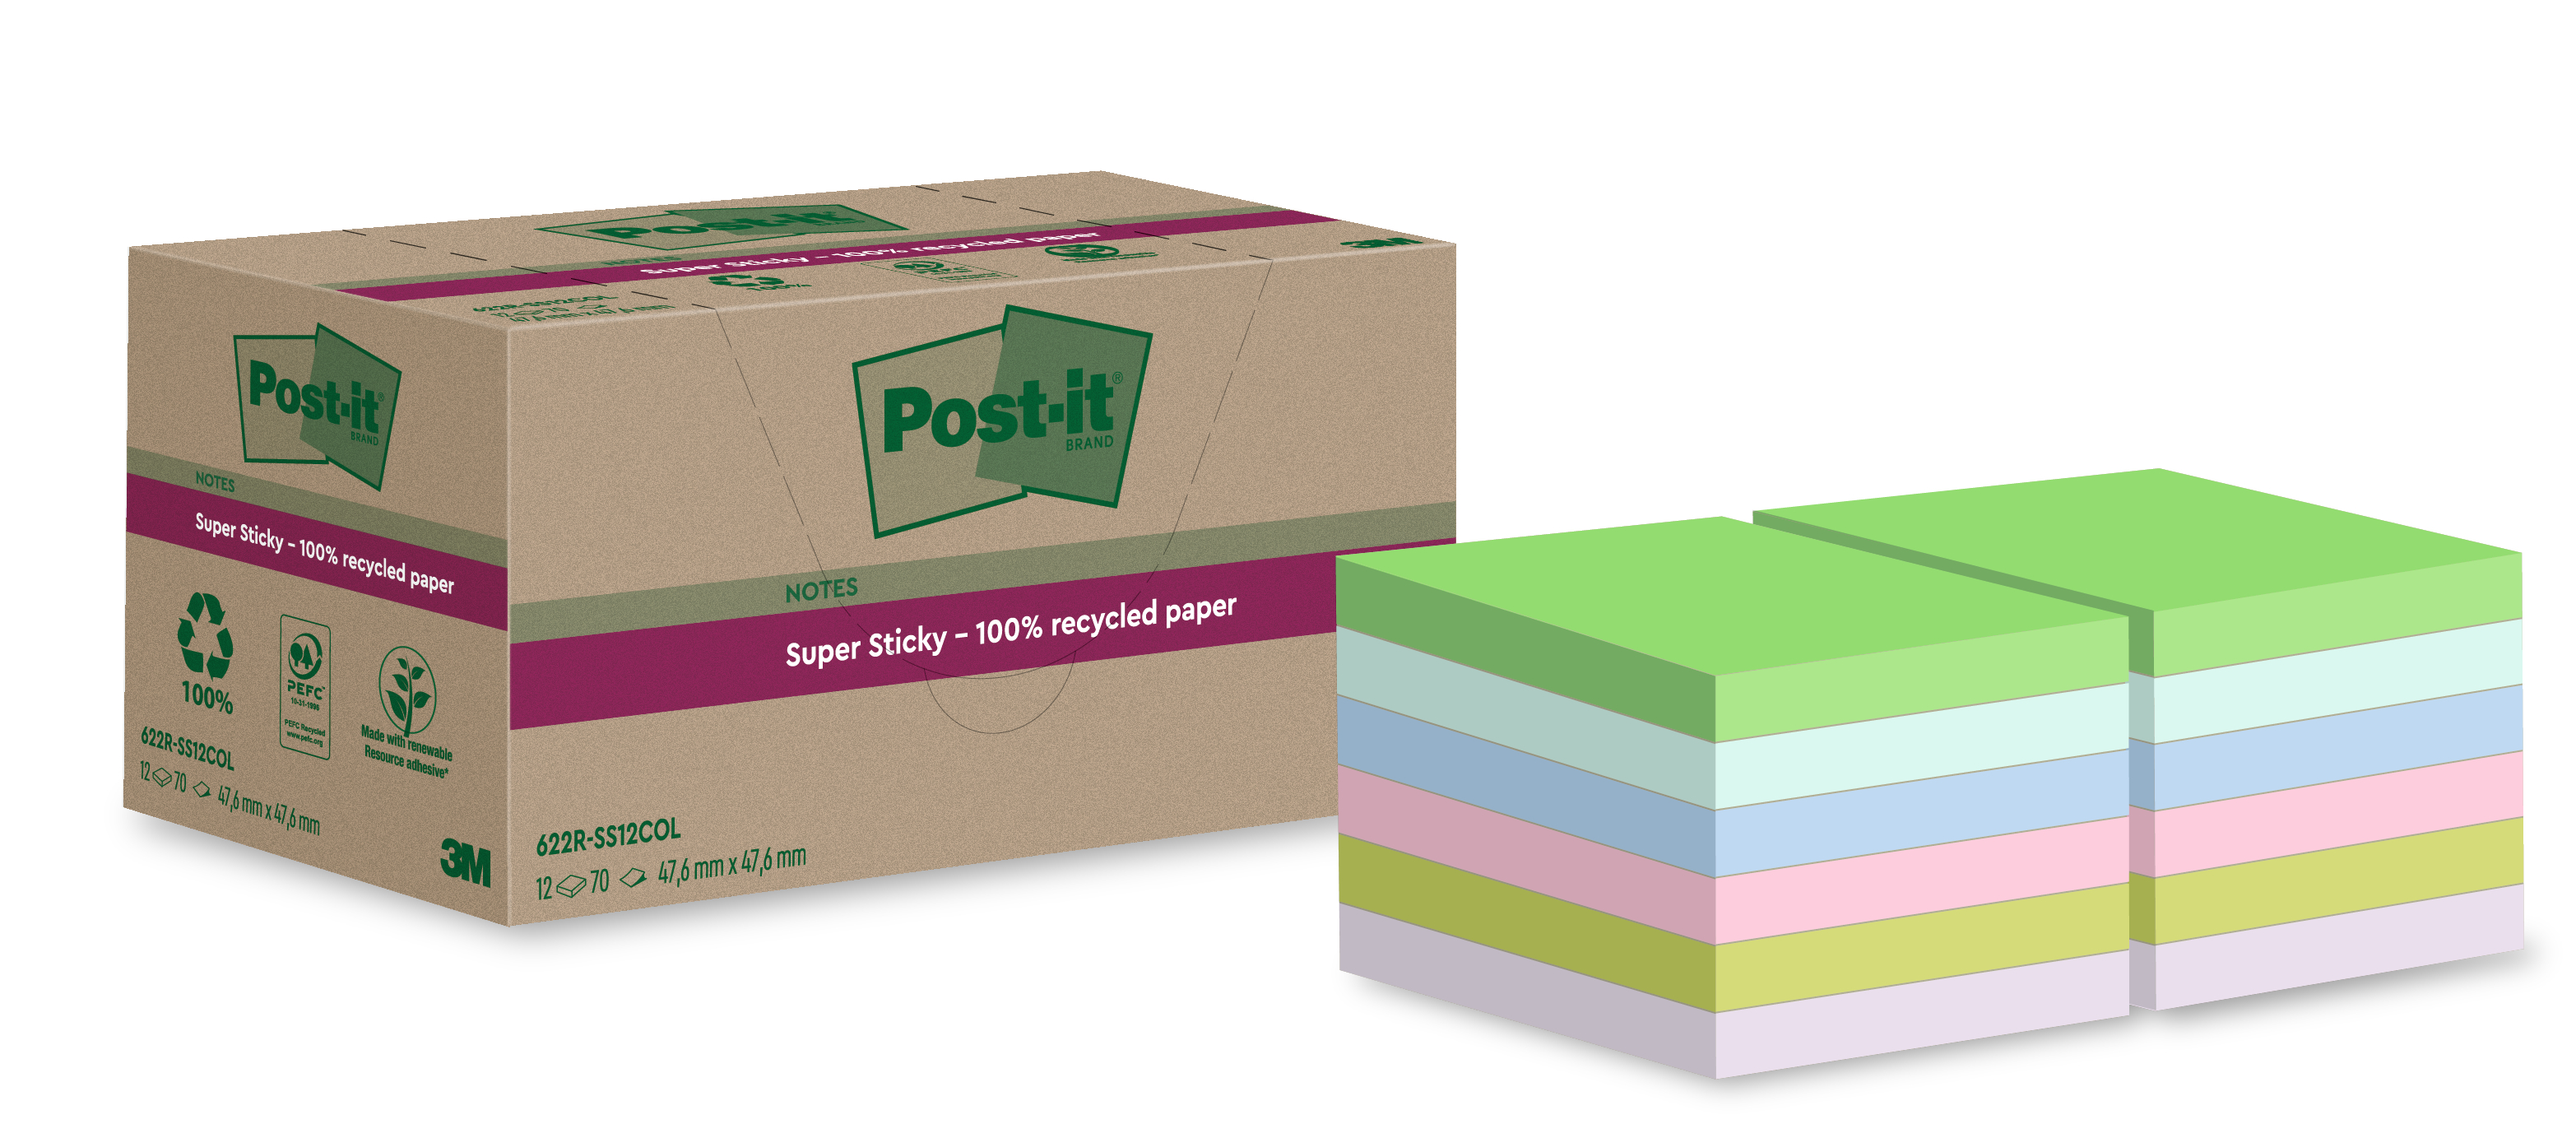 POST-IT SuperSticky Notes 47.6x47.6mm 622 RSS12COL Recycling,assort. 12x70 flls.